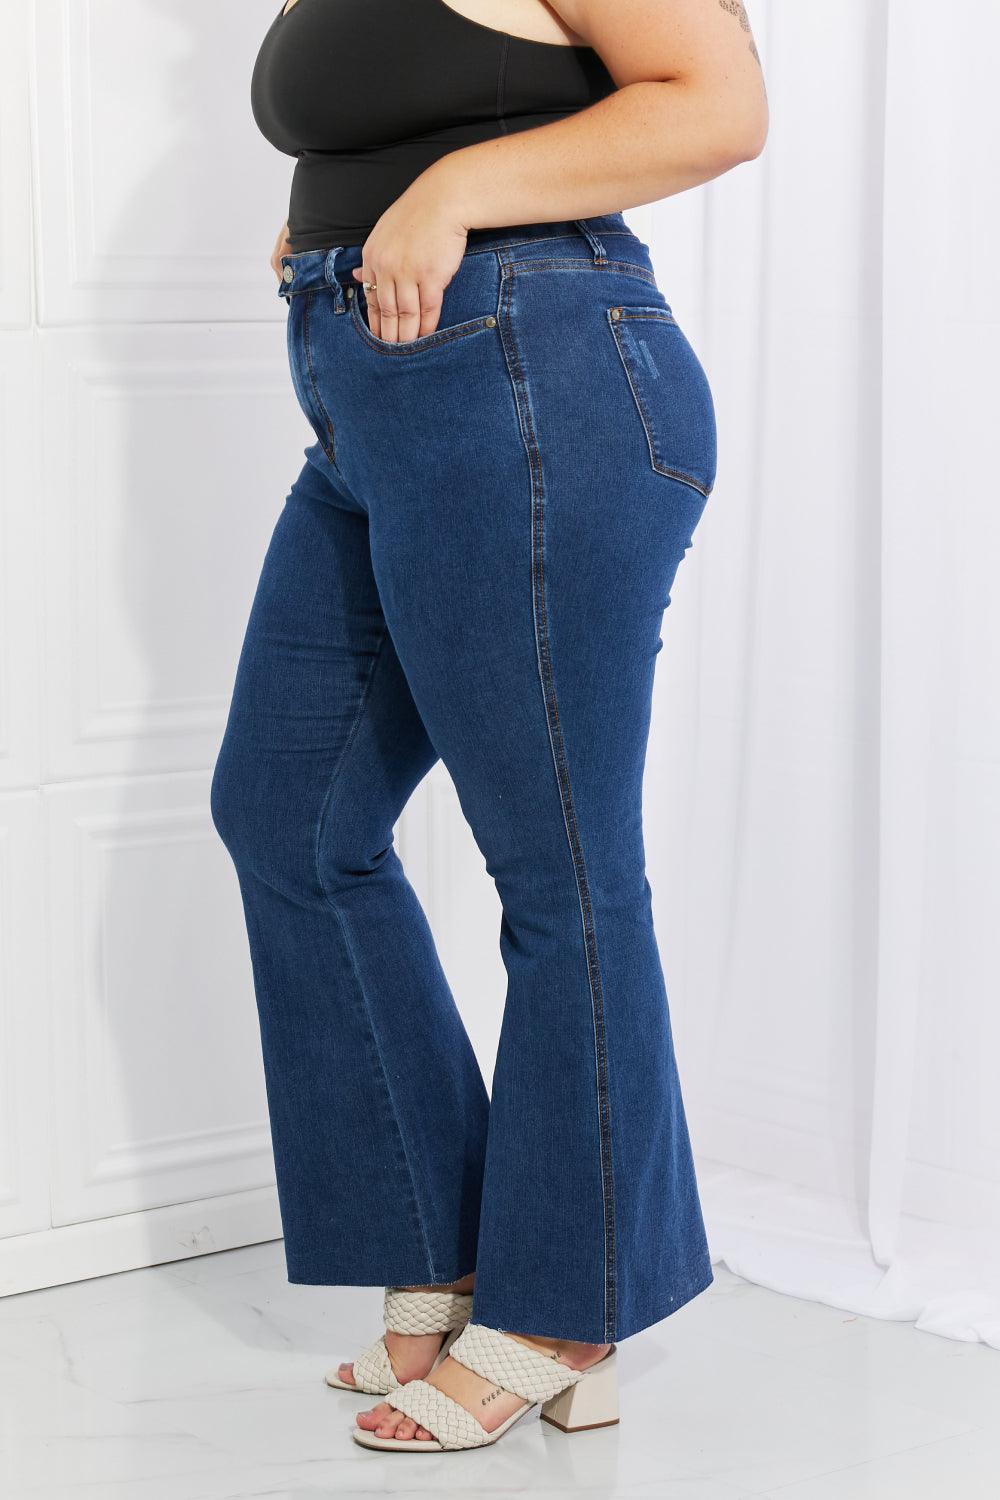 Omg the best Judy Blues ever made! Tummy Control! #judybluejeans #size